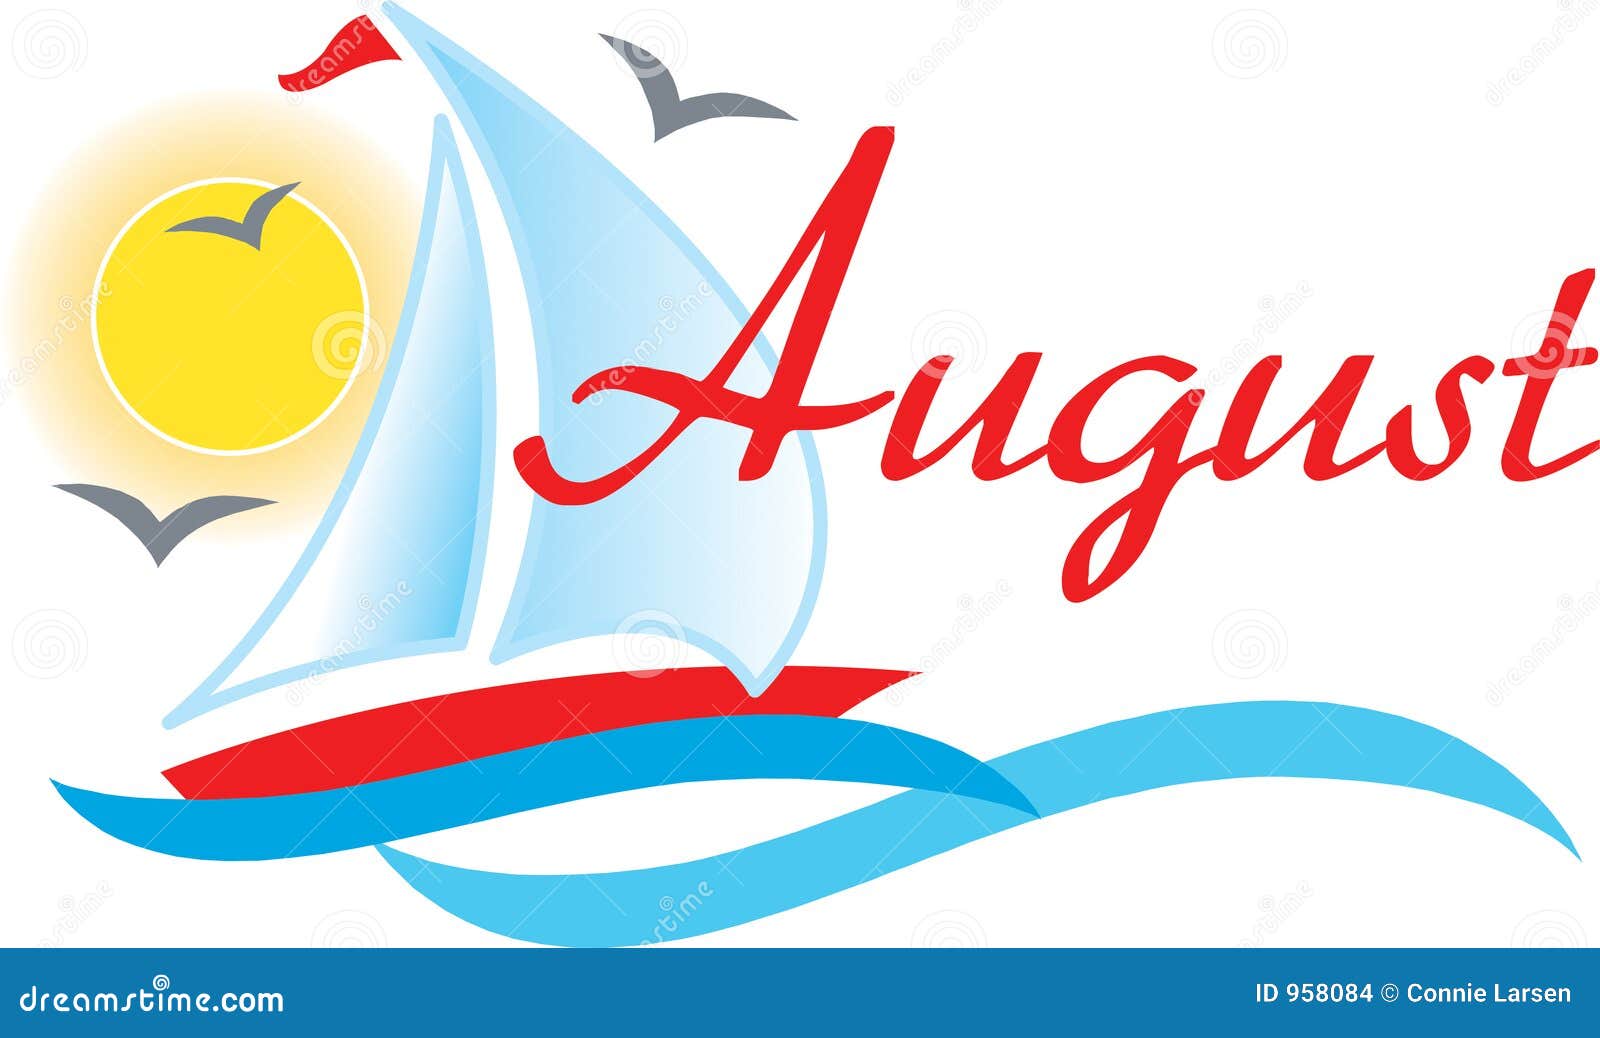 August headline with a stylized illustration of a sailboat.